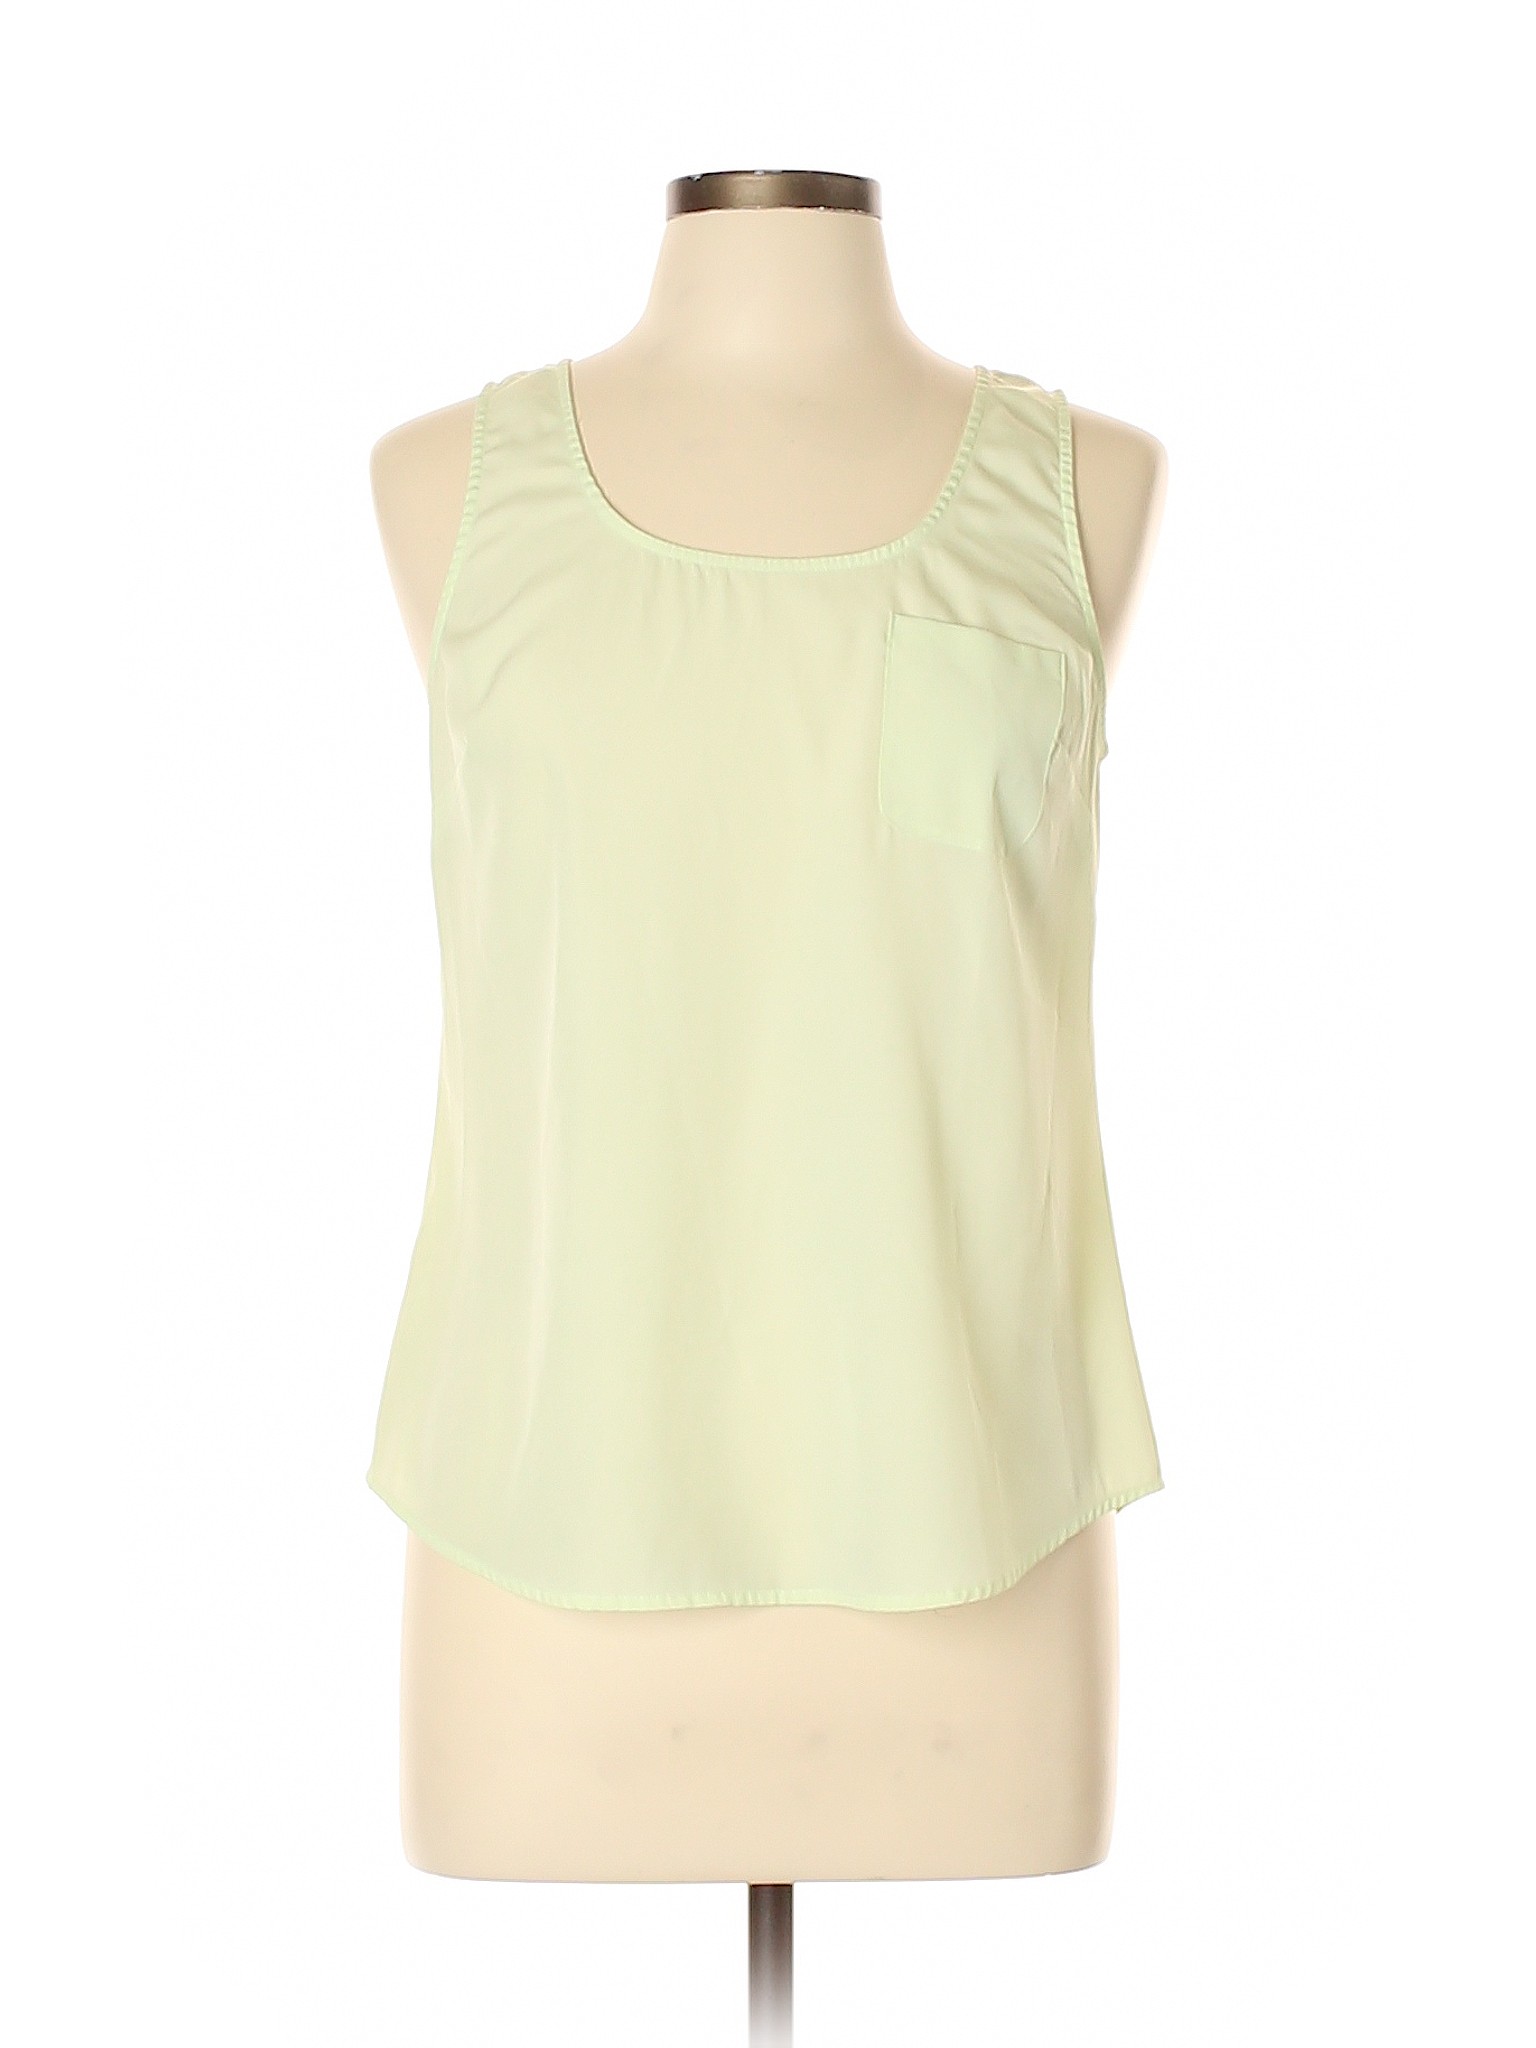 oasis Solid Green Light Green Sleeveless Blouse Size 12 - 88% off | thredUP